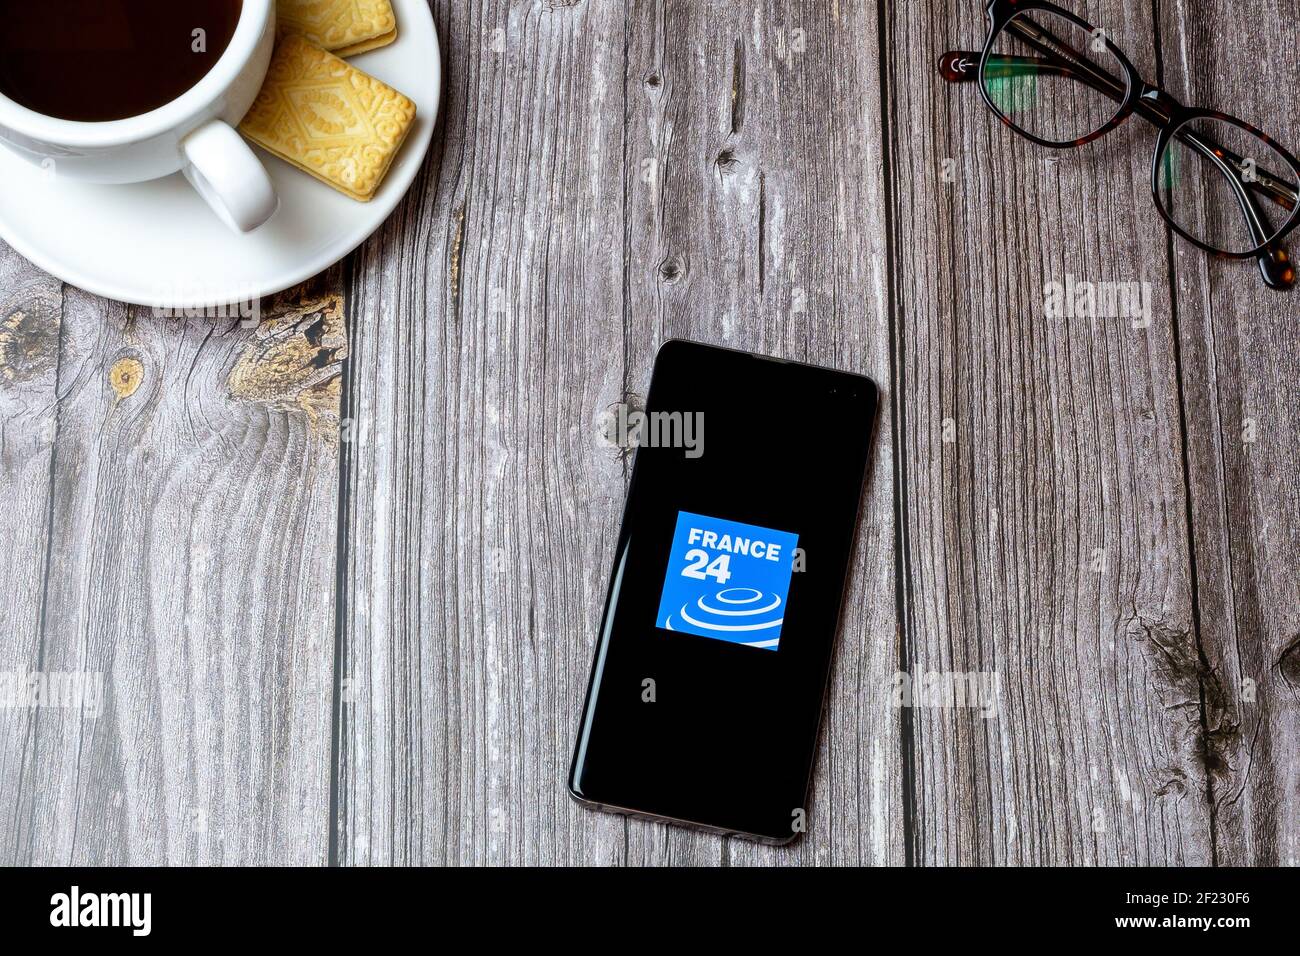 A mobile phone or cell phone on a wooden table with the France 24 news app open next to a coffee and glasses Stock Photo